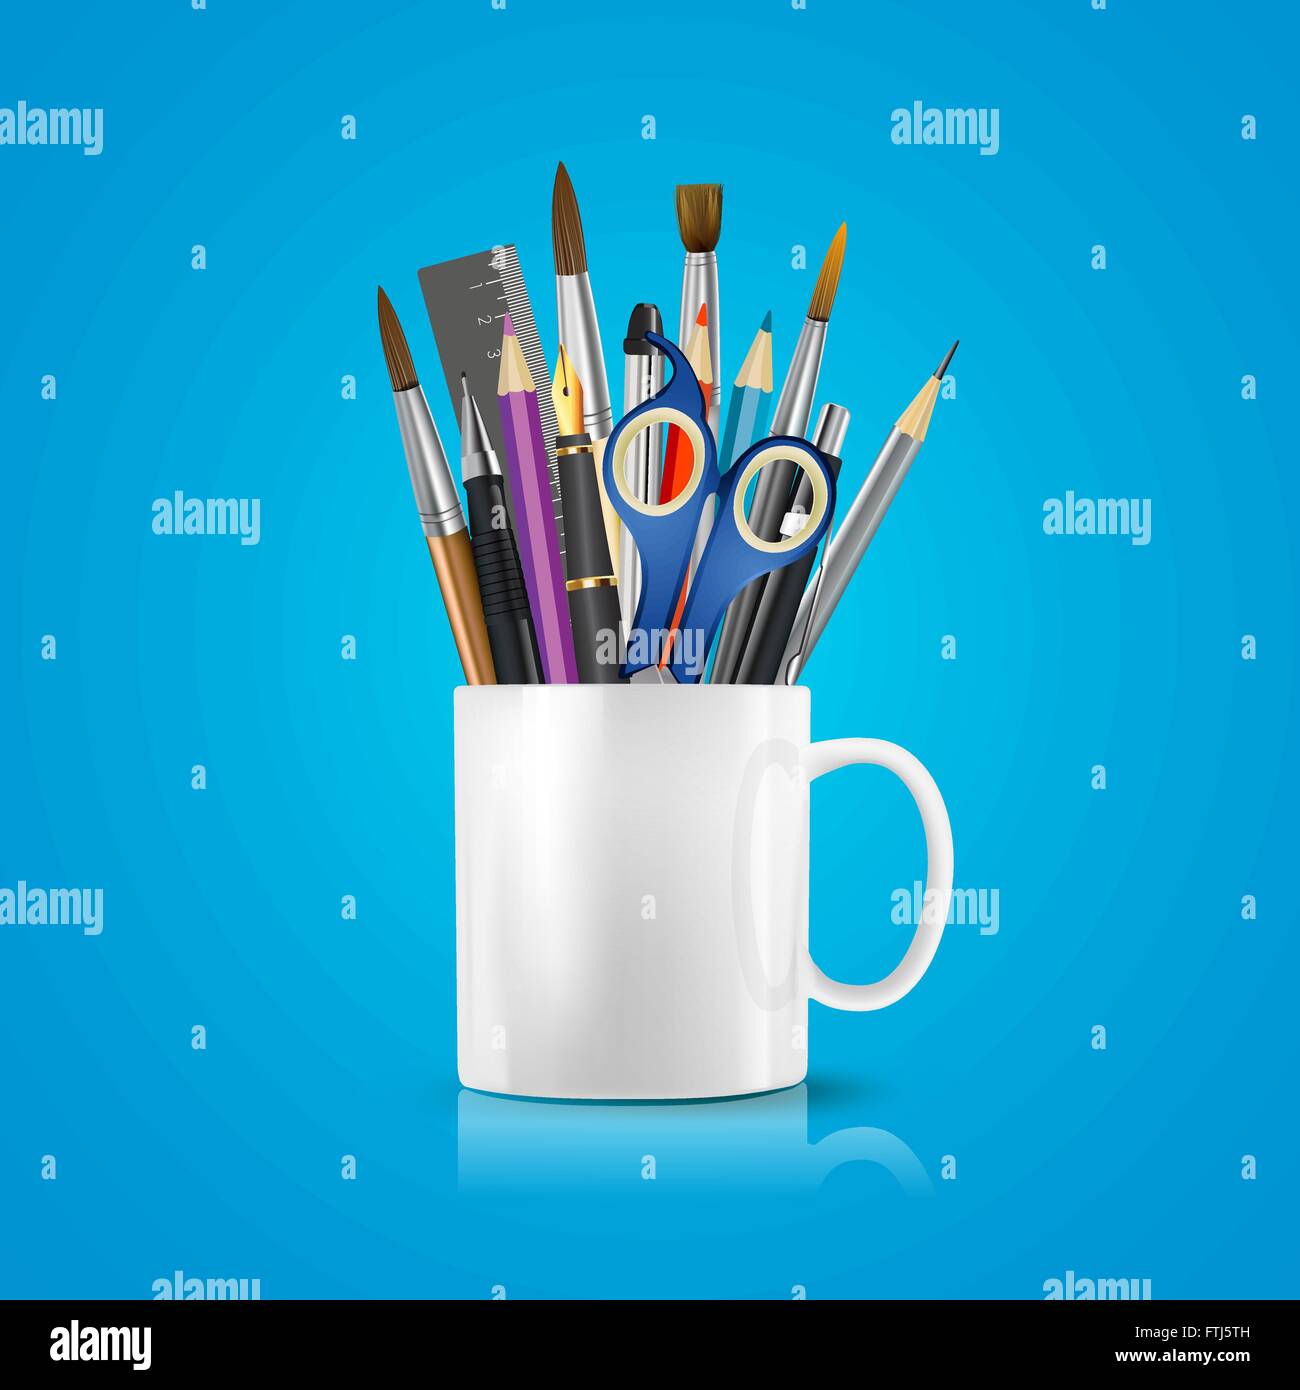 https://c8.alamy.com/comp/FTJ5TH/white-realistic-cup-with-office-supplies-pencils-pens-scissors-ruler-FTJ5TH.jpg